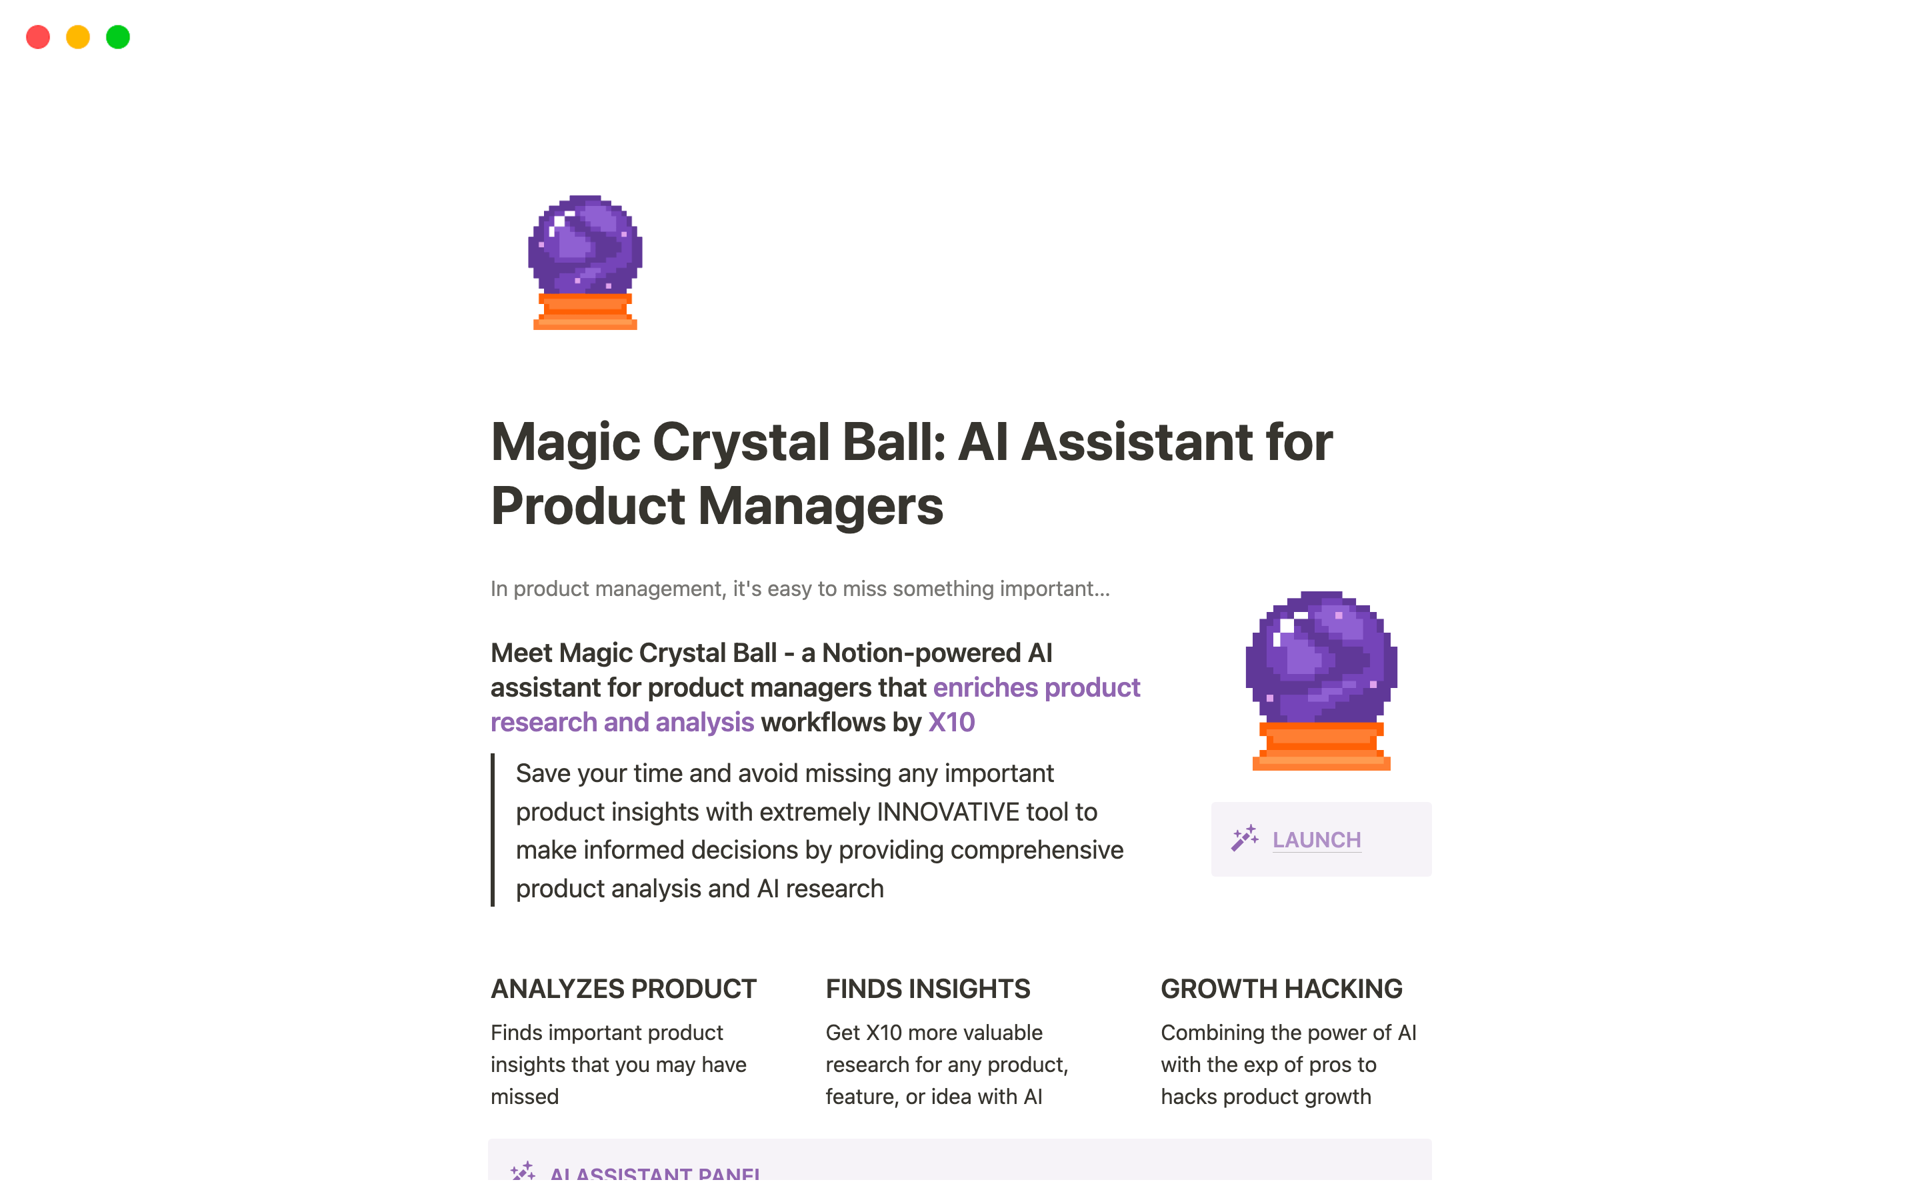 Magic Crystal Ball: AI Assistant for Product Managerのテンプレートのプレビュー